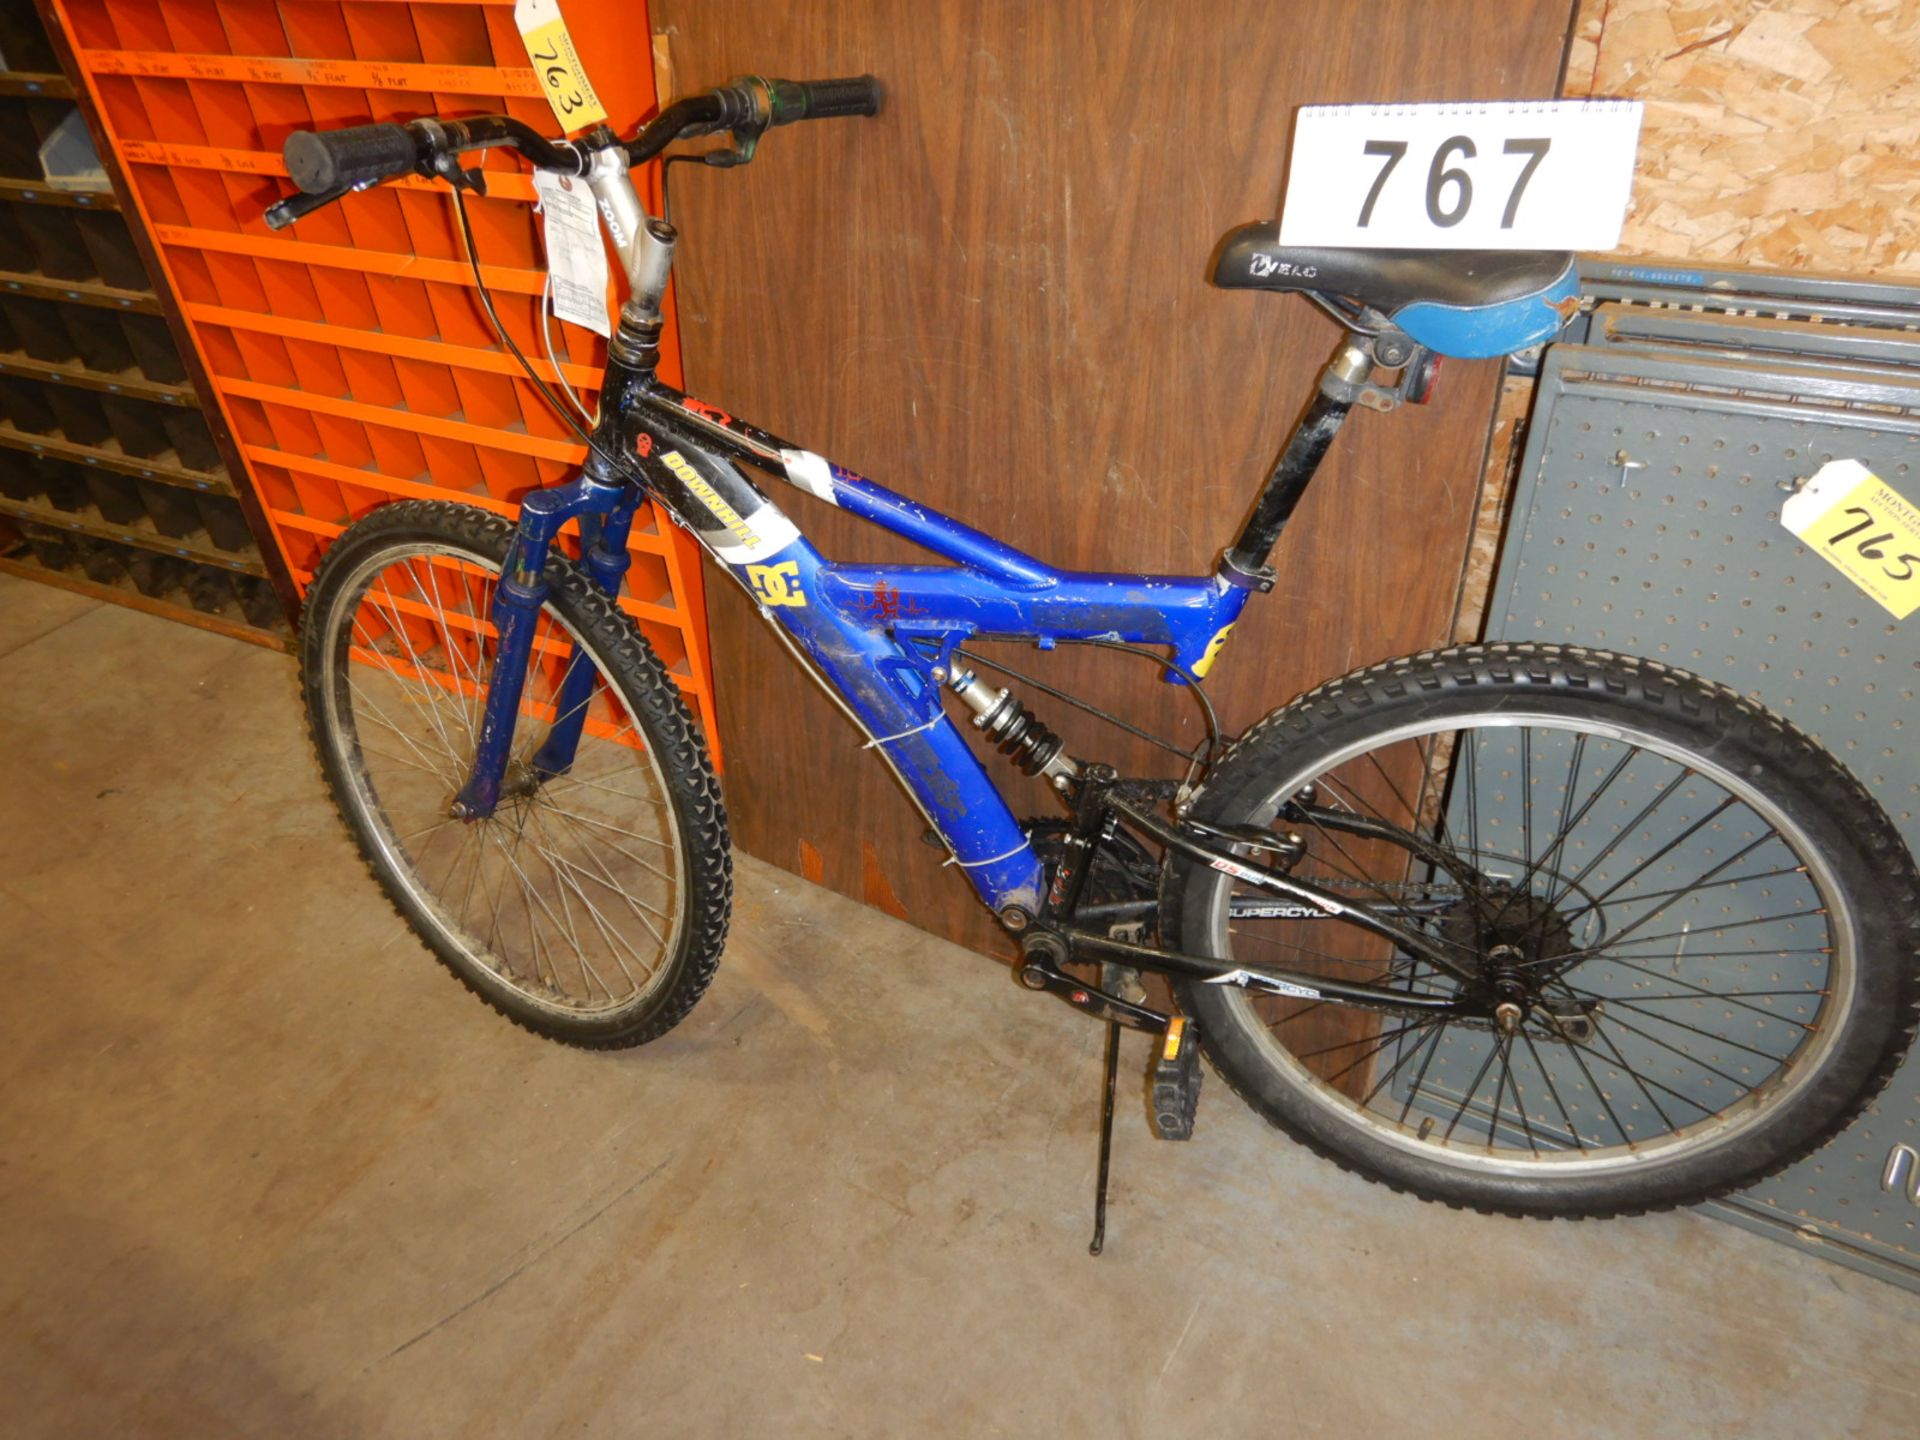 DC DOWNHILL SUPER CYCLE 24"